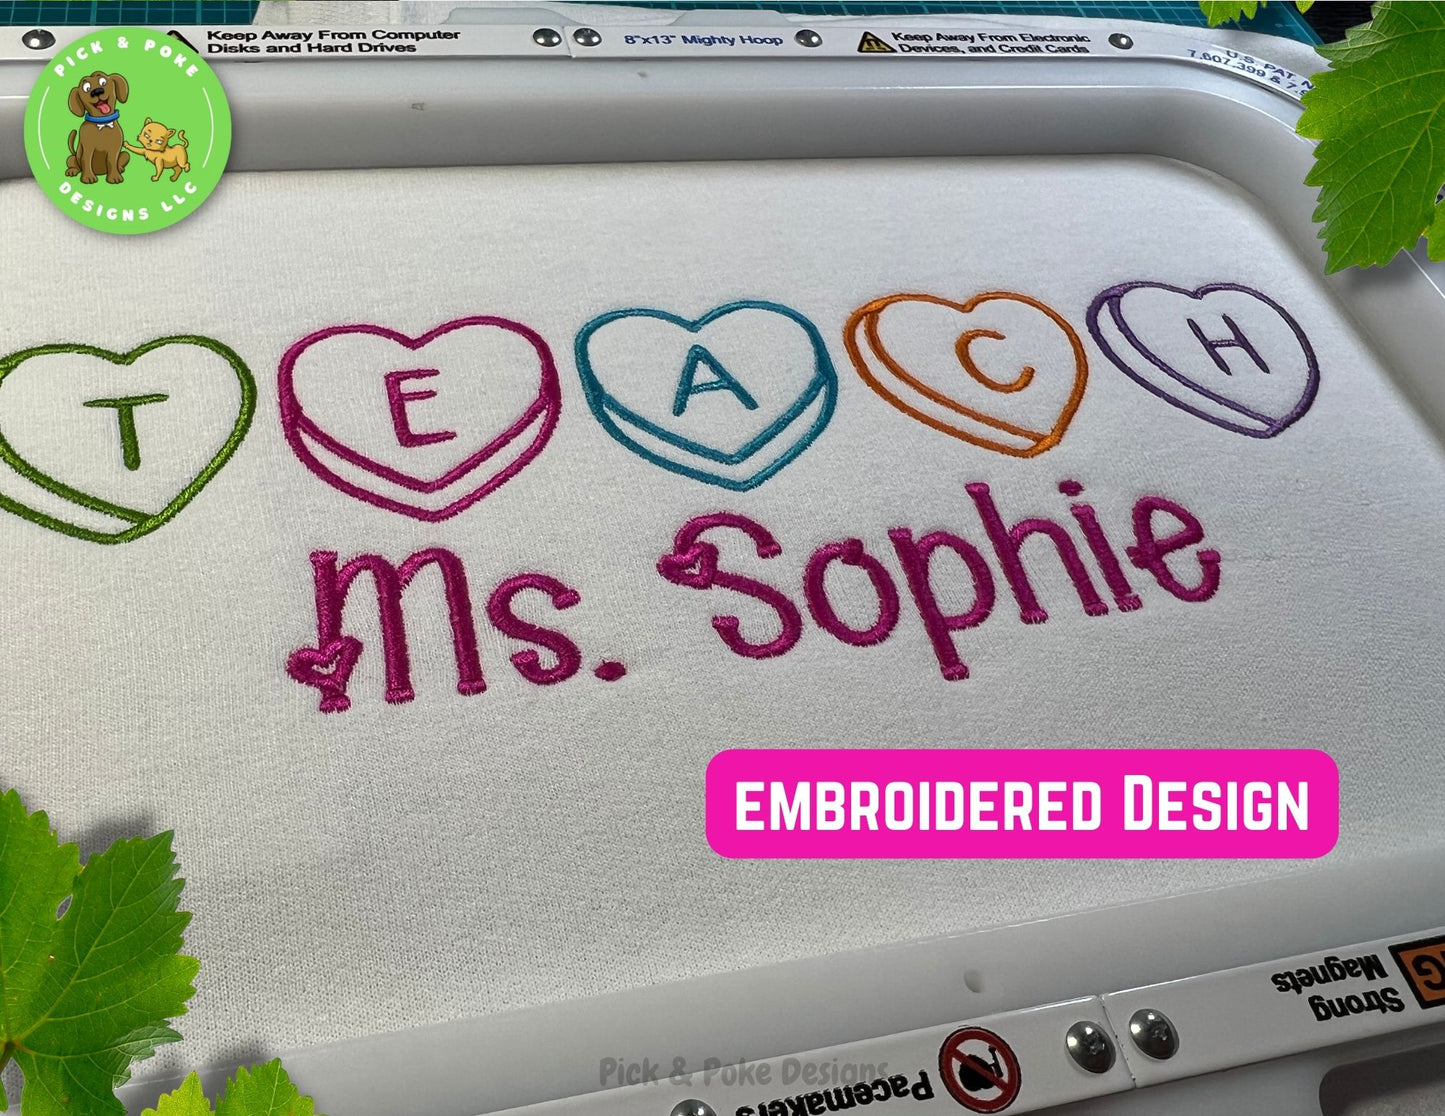 Teach design and name are embroidered on the fabric so it will not fade or peel off like iron transfers or vinyl.